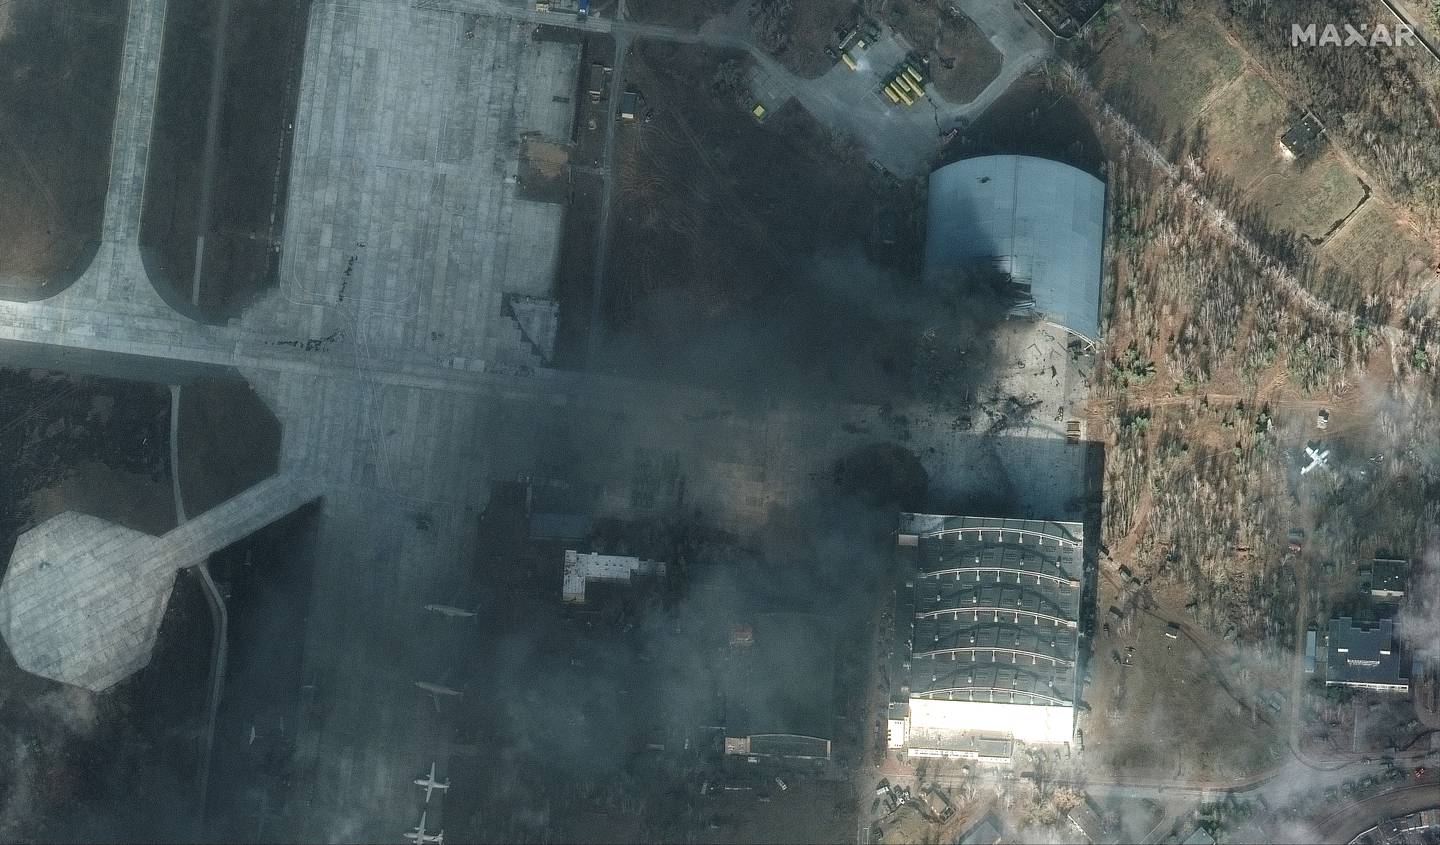 A satellite image shows a damaged hangar at the Antonov Airport in Gostomel, Ukraine on February 27, 2022. Photo: Maxar Technologies / via Reuters